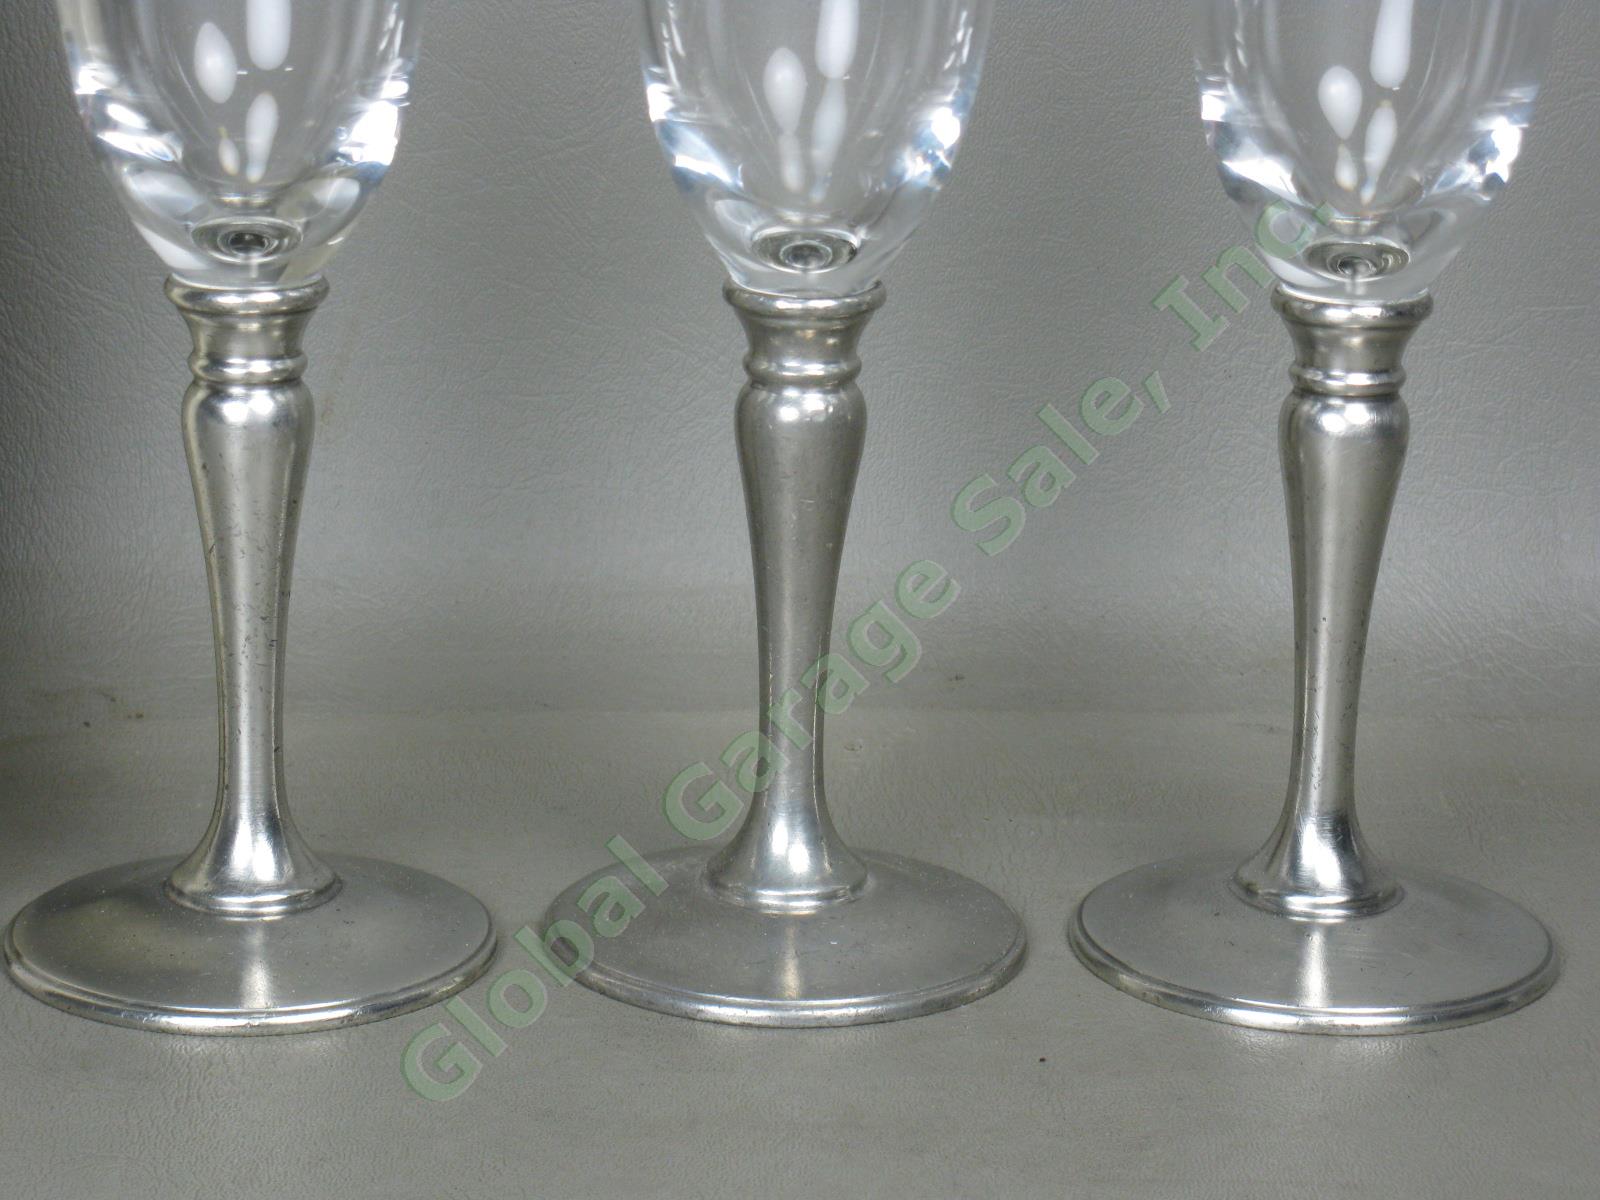 3 NEW Match Pewter 8" Champagne Flutes Glasses Made In Italy $90 Each Retail NR! 2